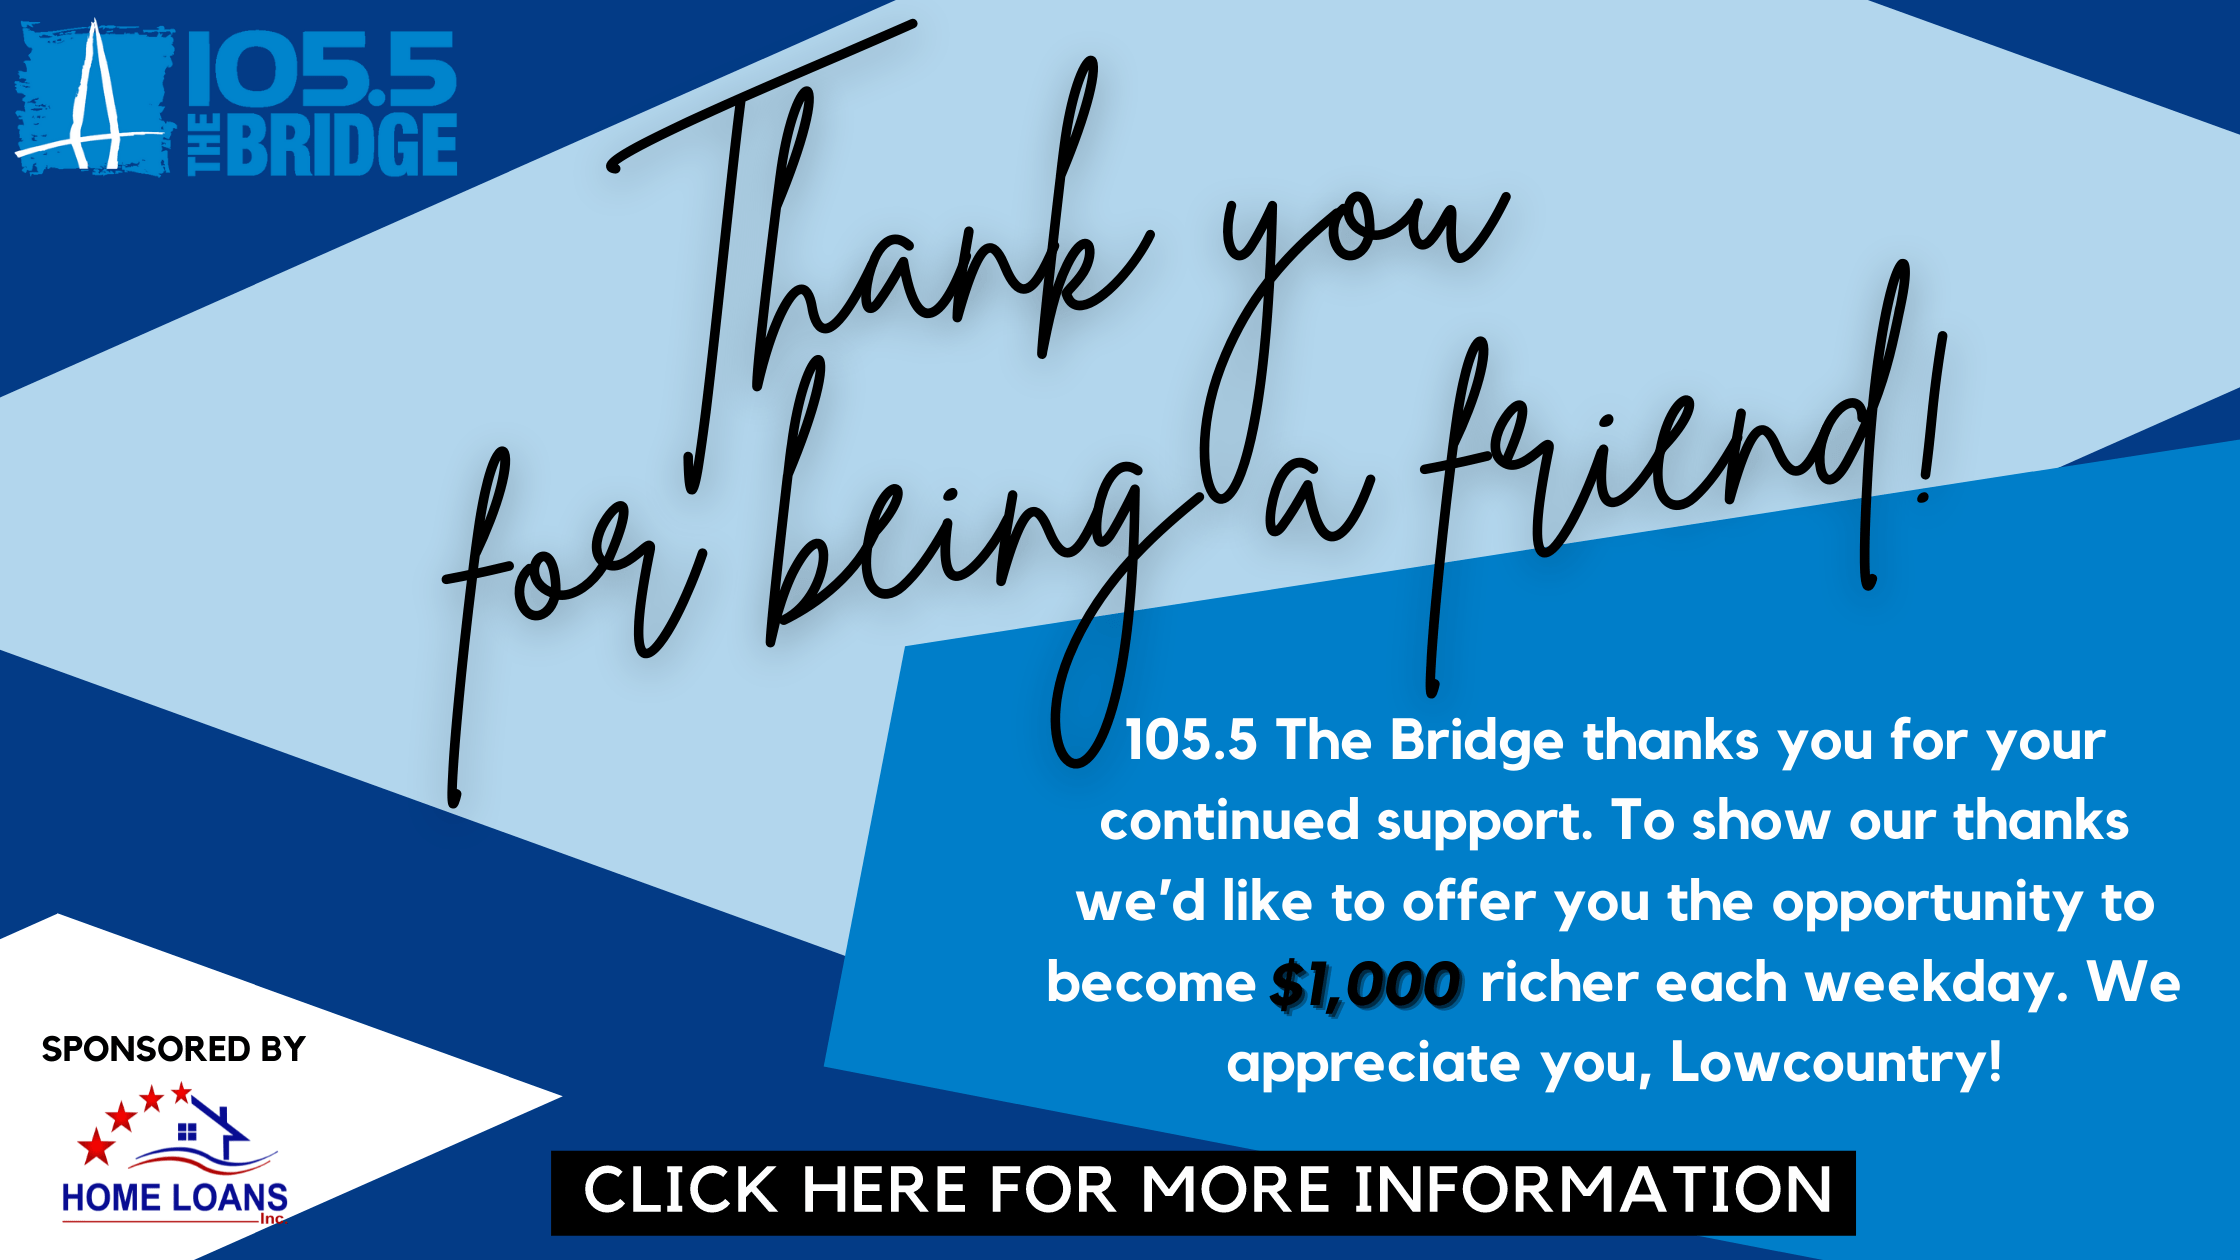 thank-you-for-being-a-friend-charleston-sc-105-5-the-bridge